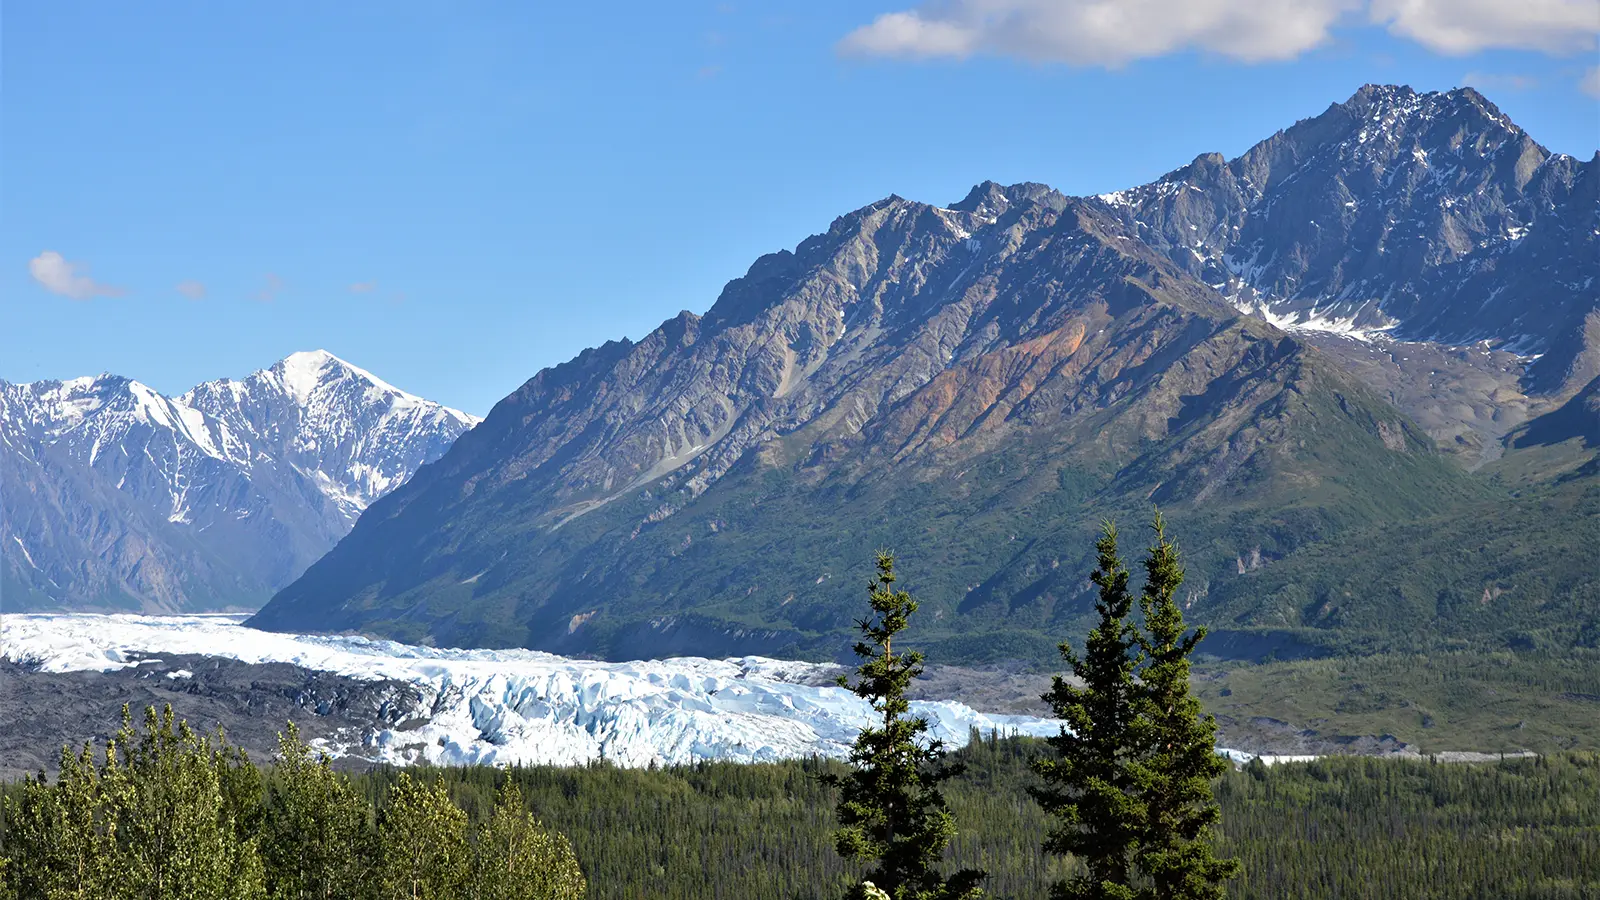 Facts About Alaska